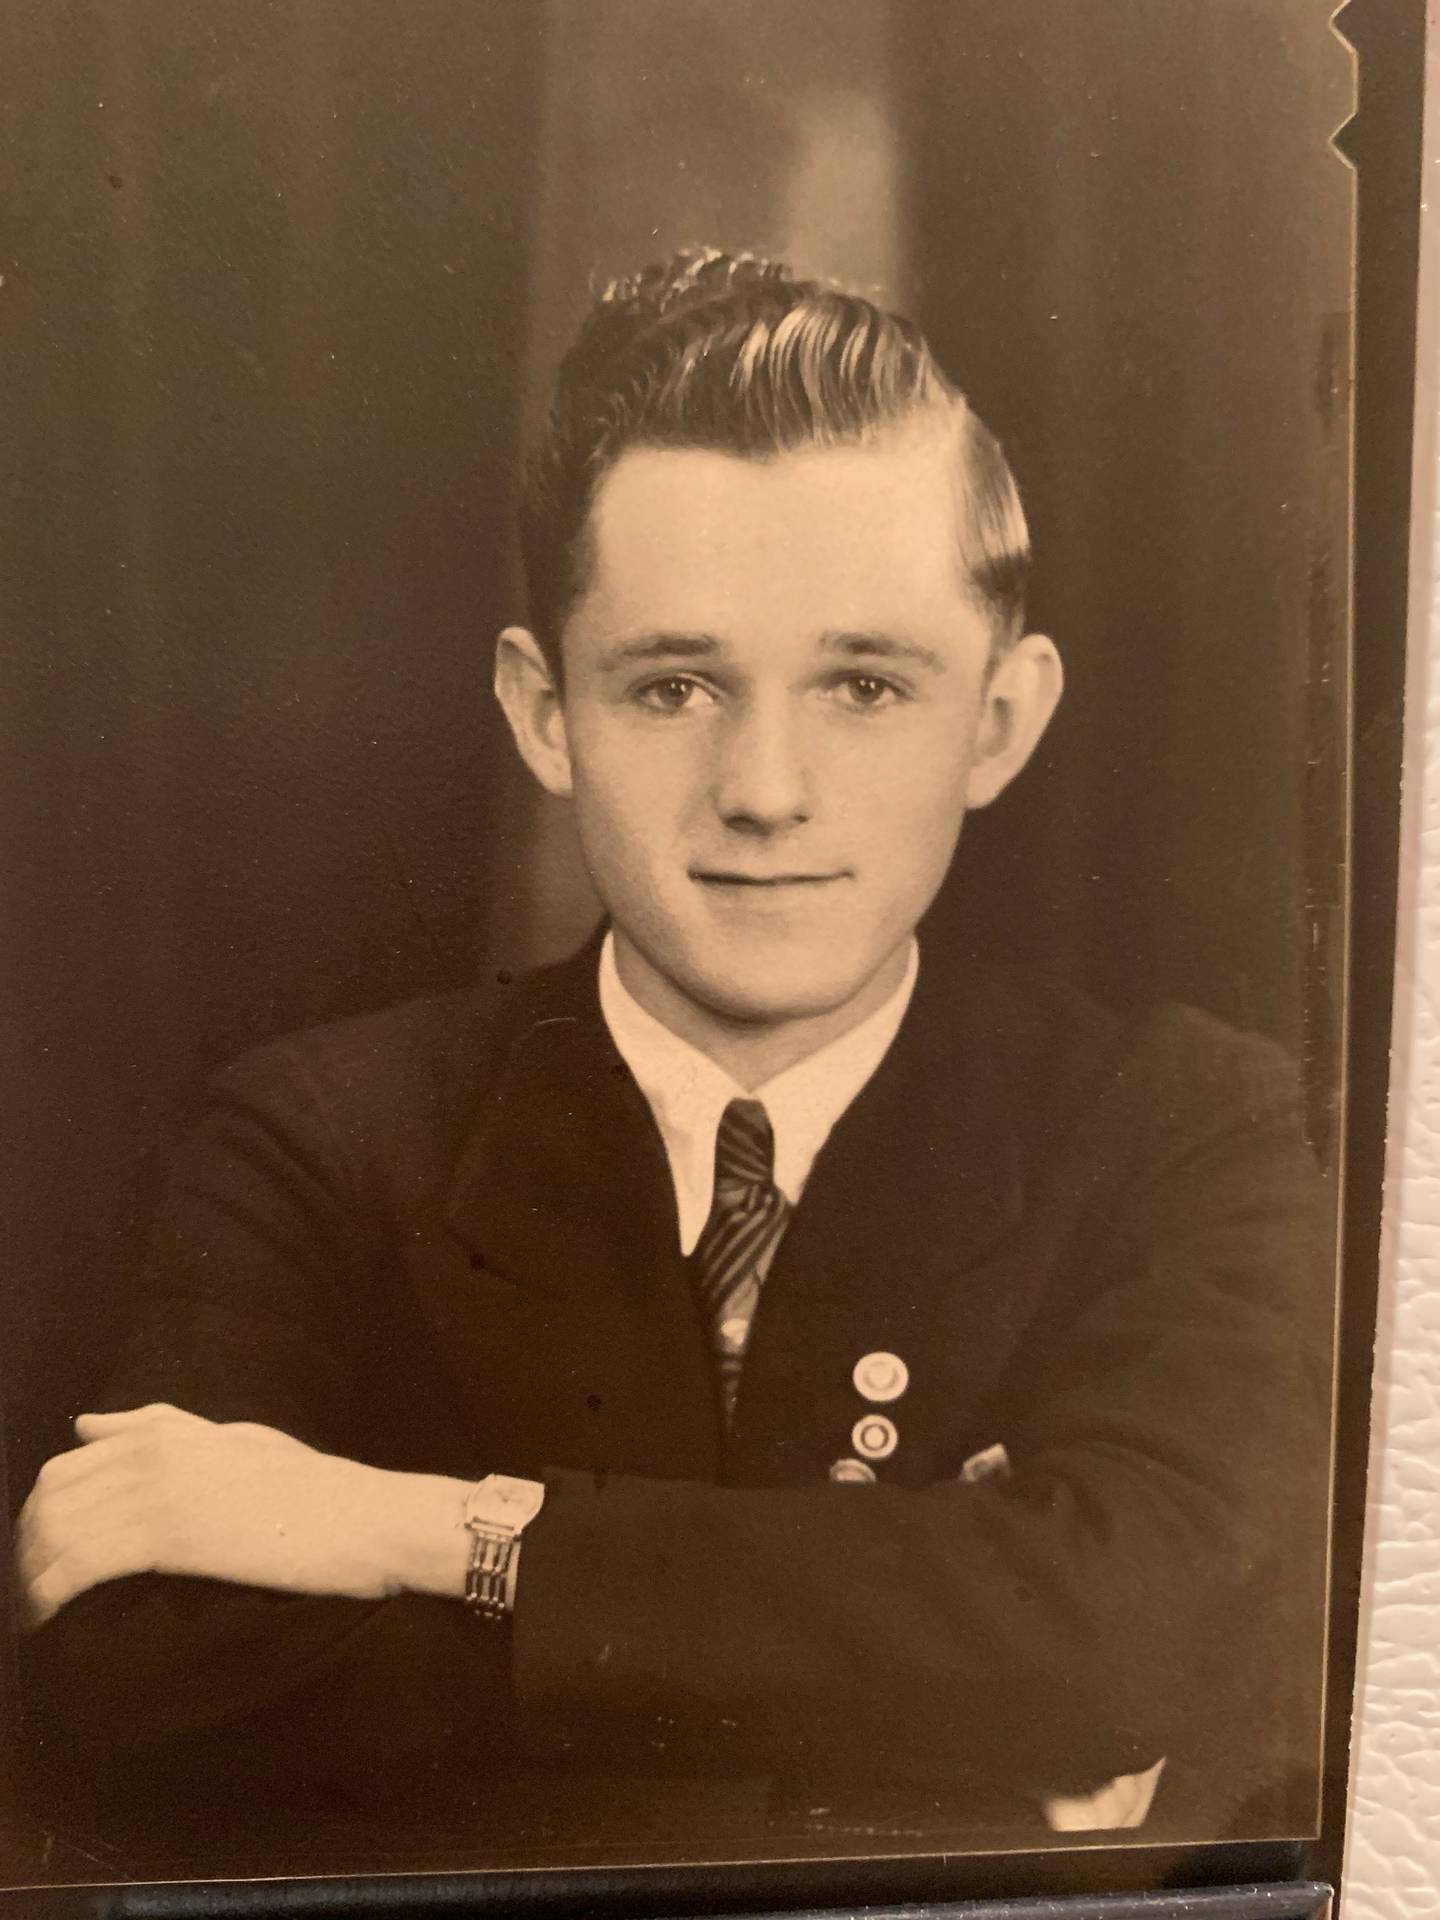 Dixon U.S. Army Private Myron E. Williams, who was killed in action in Germany during WWII, was recovered and identified by the Defense POW/MIA Accounting Agency.